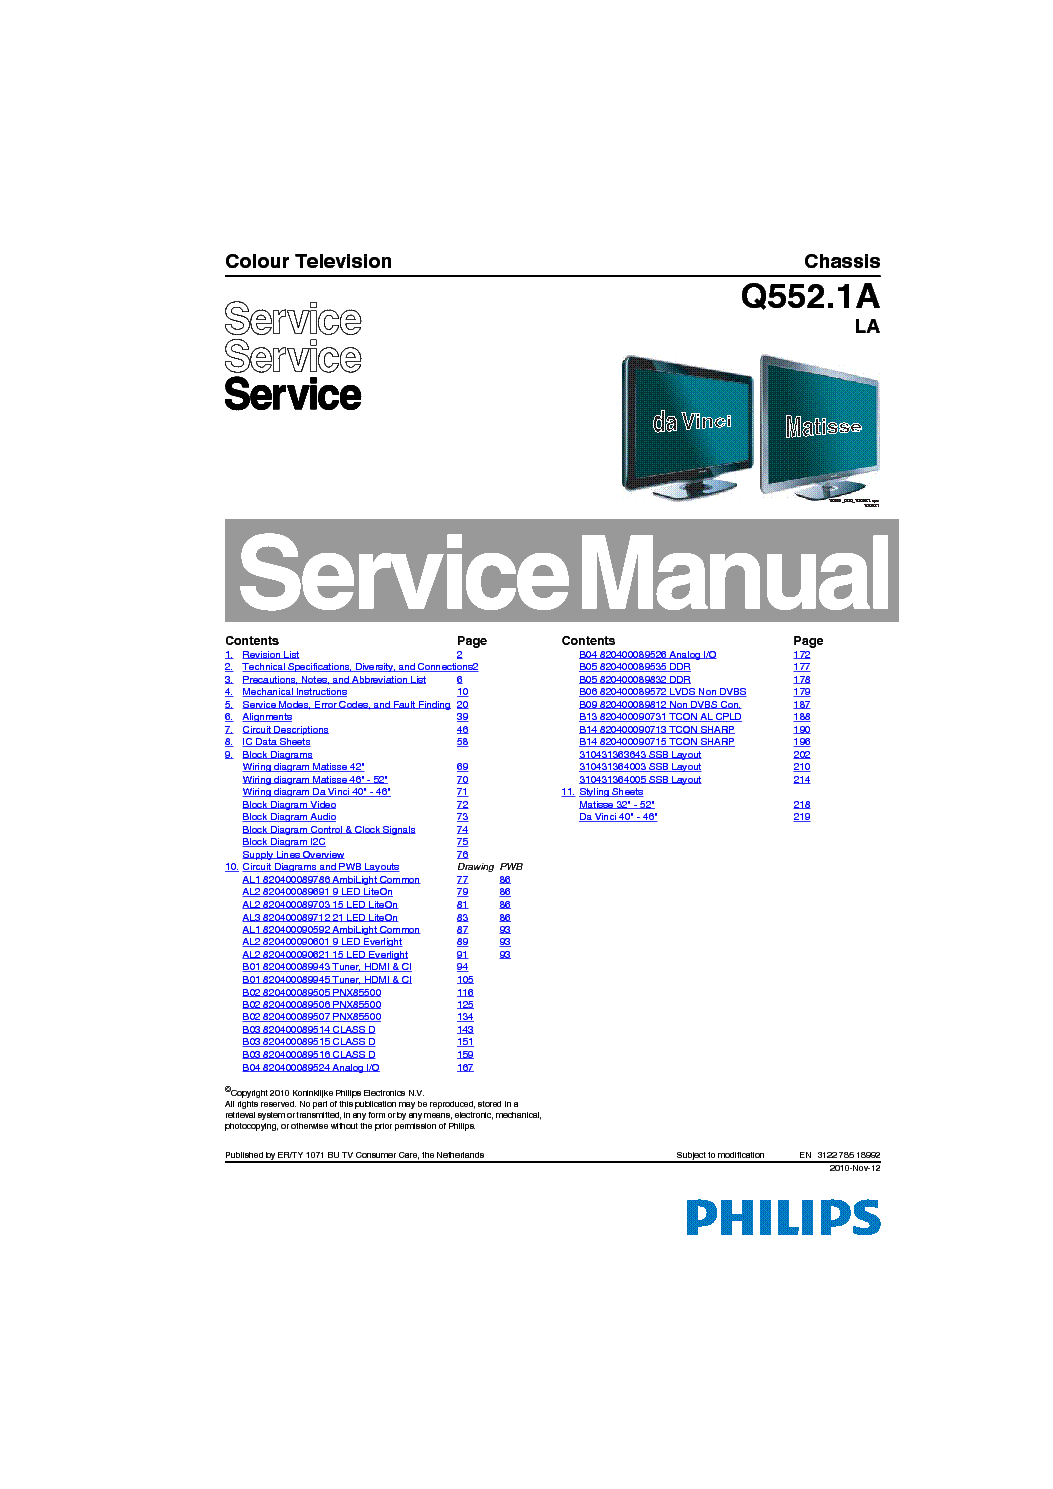 PHILIPS Q552.1A LA CHASSIS LCD TV SM service manual (1st page)